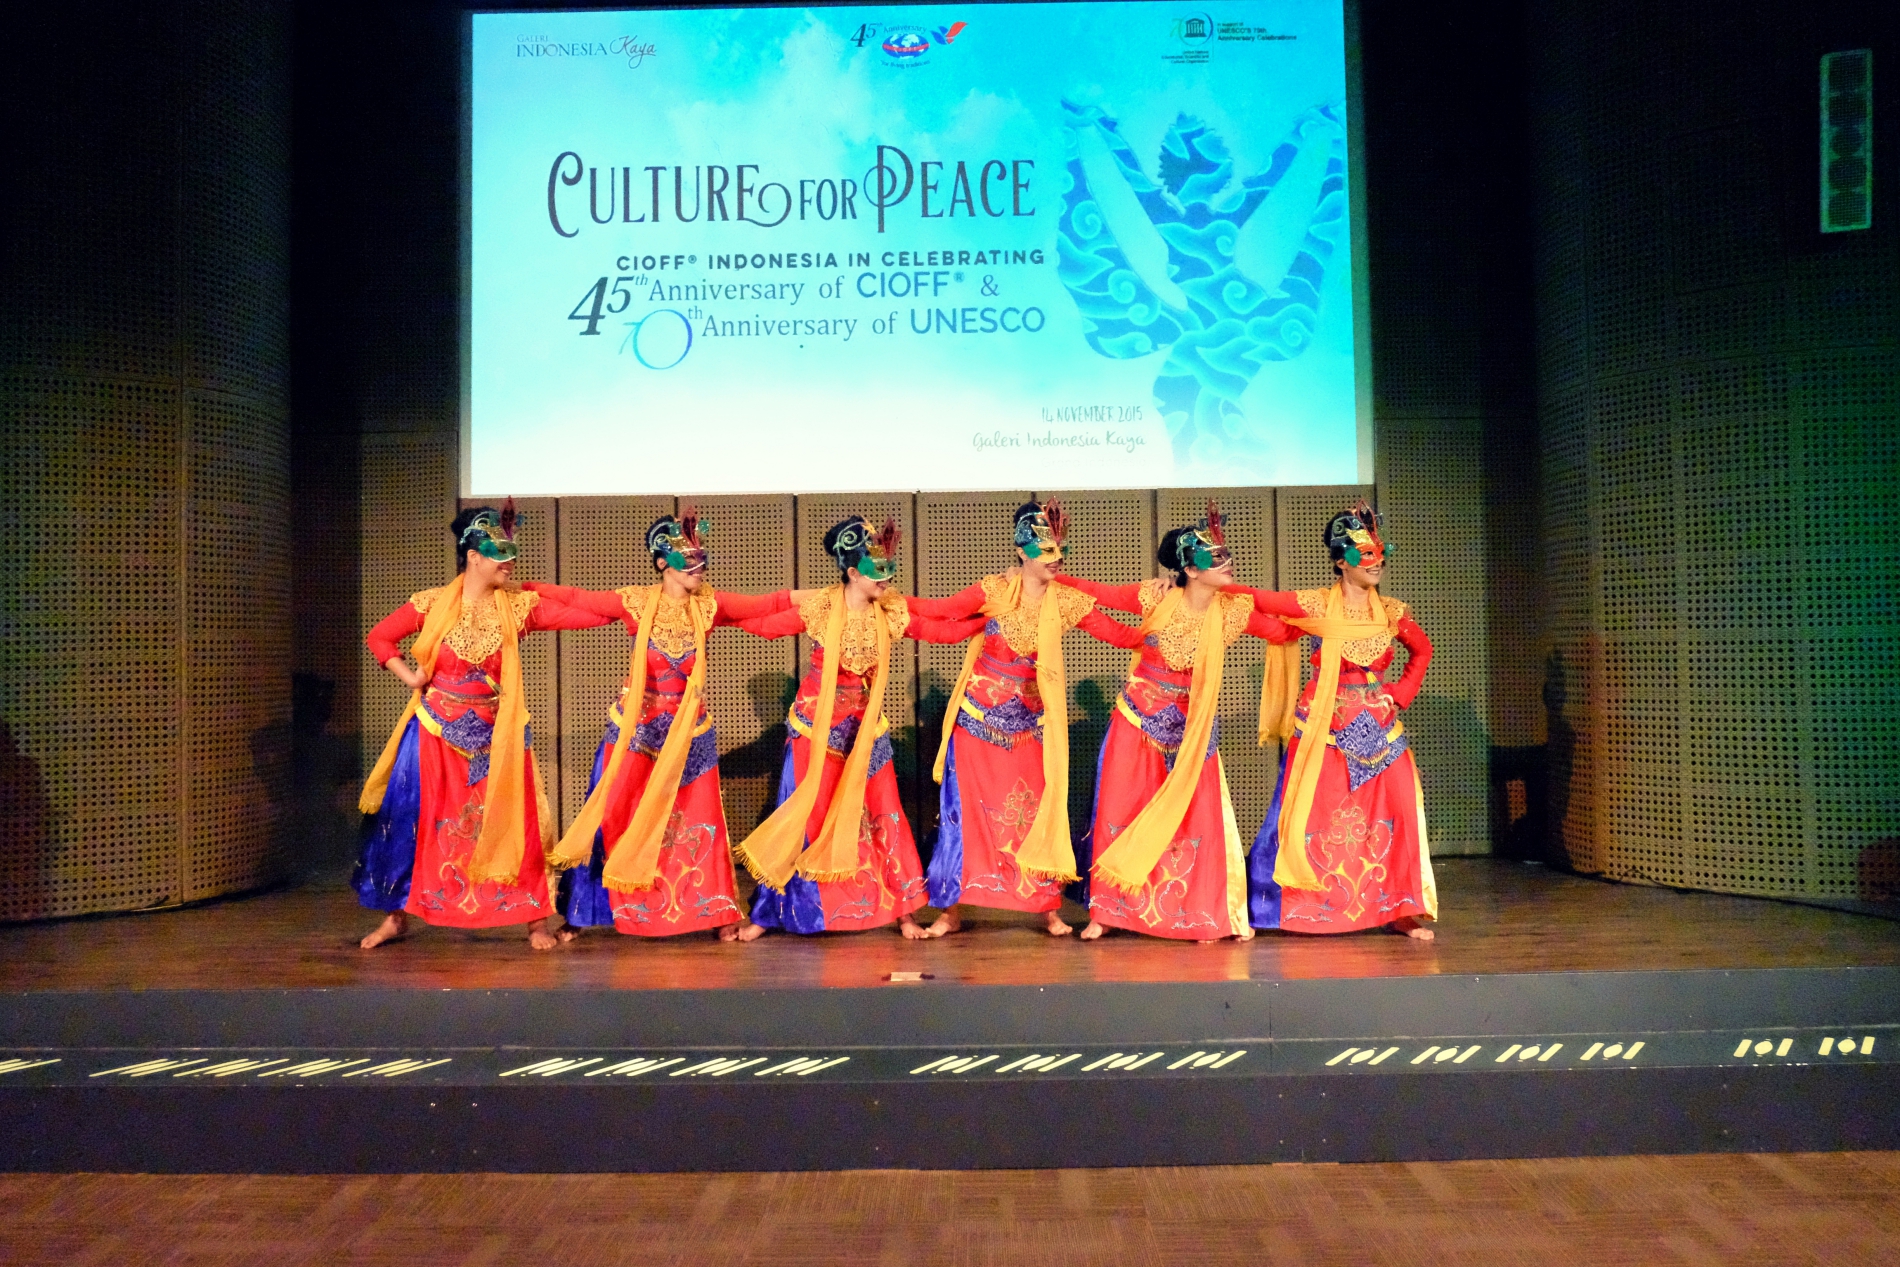 Culture for Peace